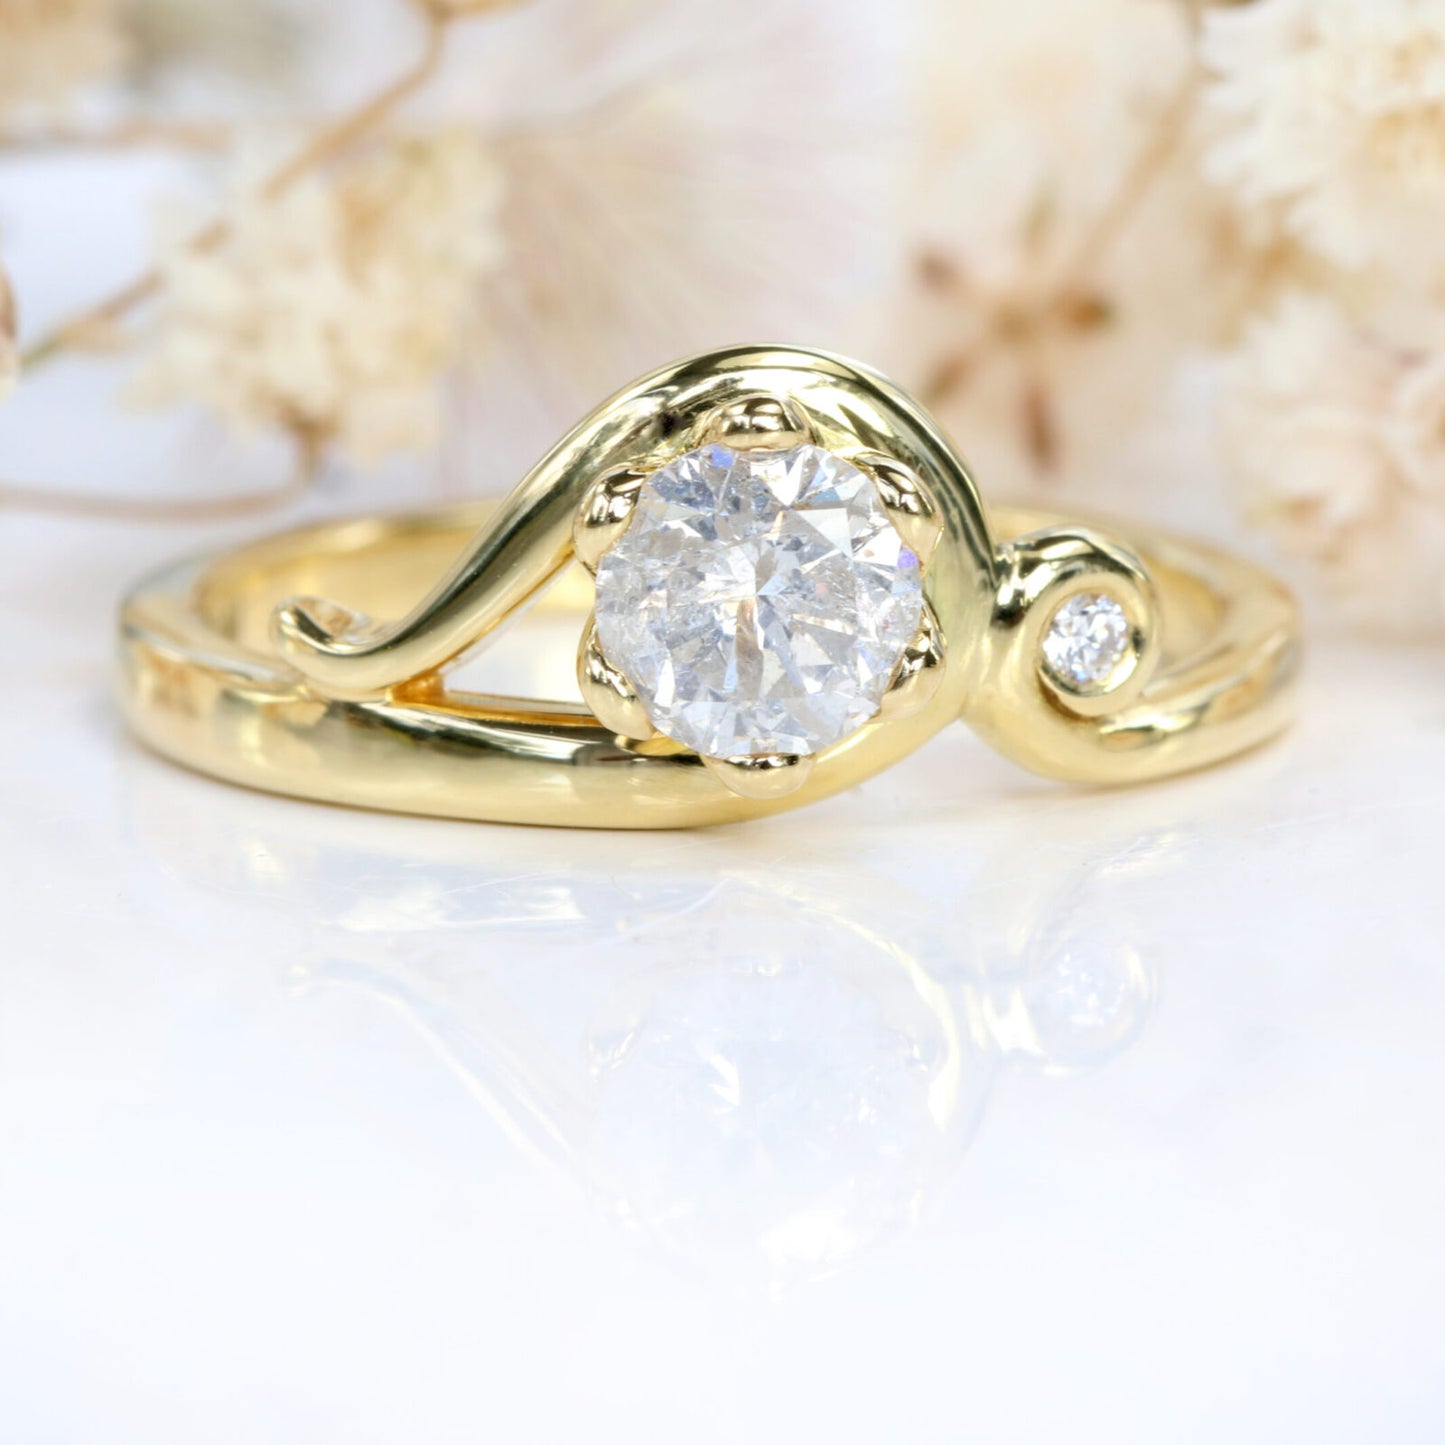 18ct Gold Icy Diamond Art Nouveau Inspired Ring (Size M, Resize J - P)